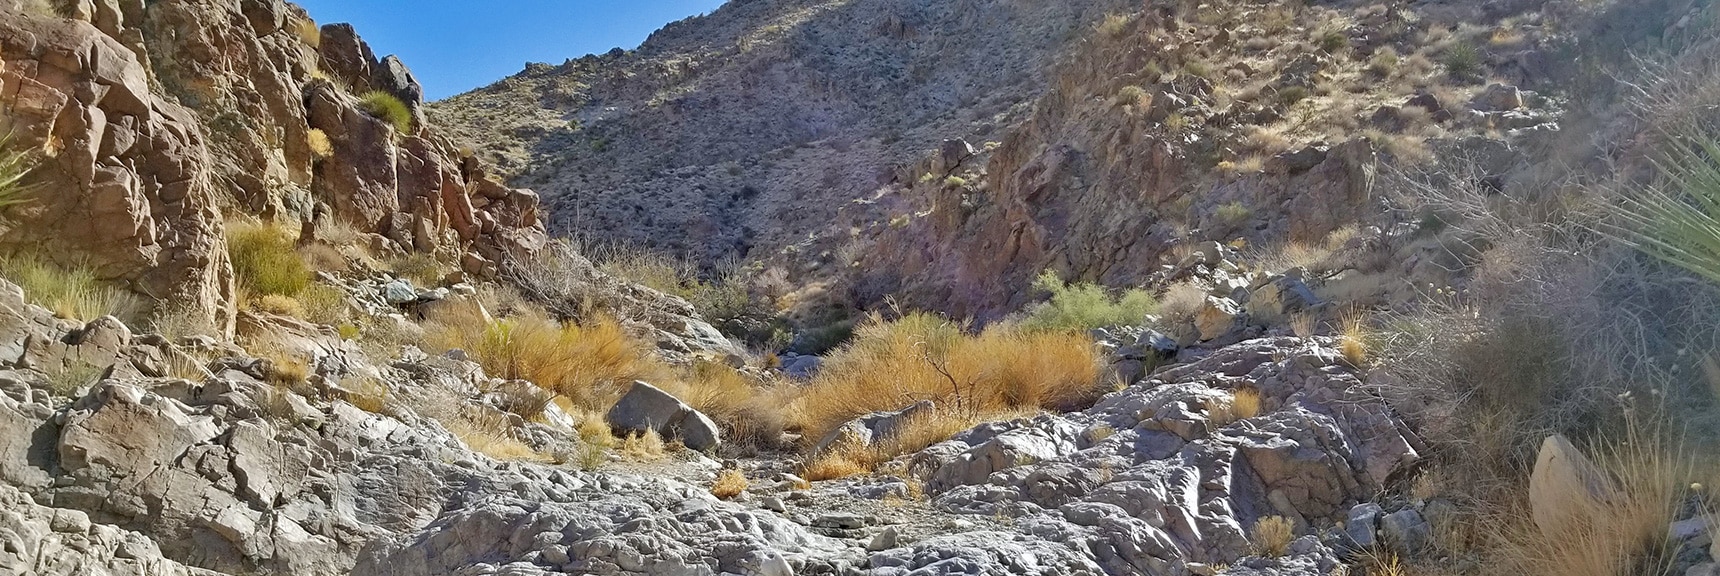 Ascending Horse Thief Canyon Above Box Canyon Barrier | Mt Wilson, Black Mountains, Arizona, Lake Mead National Recreation Area